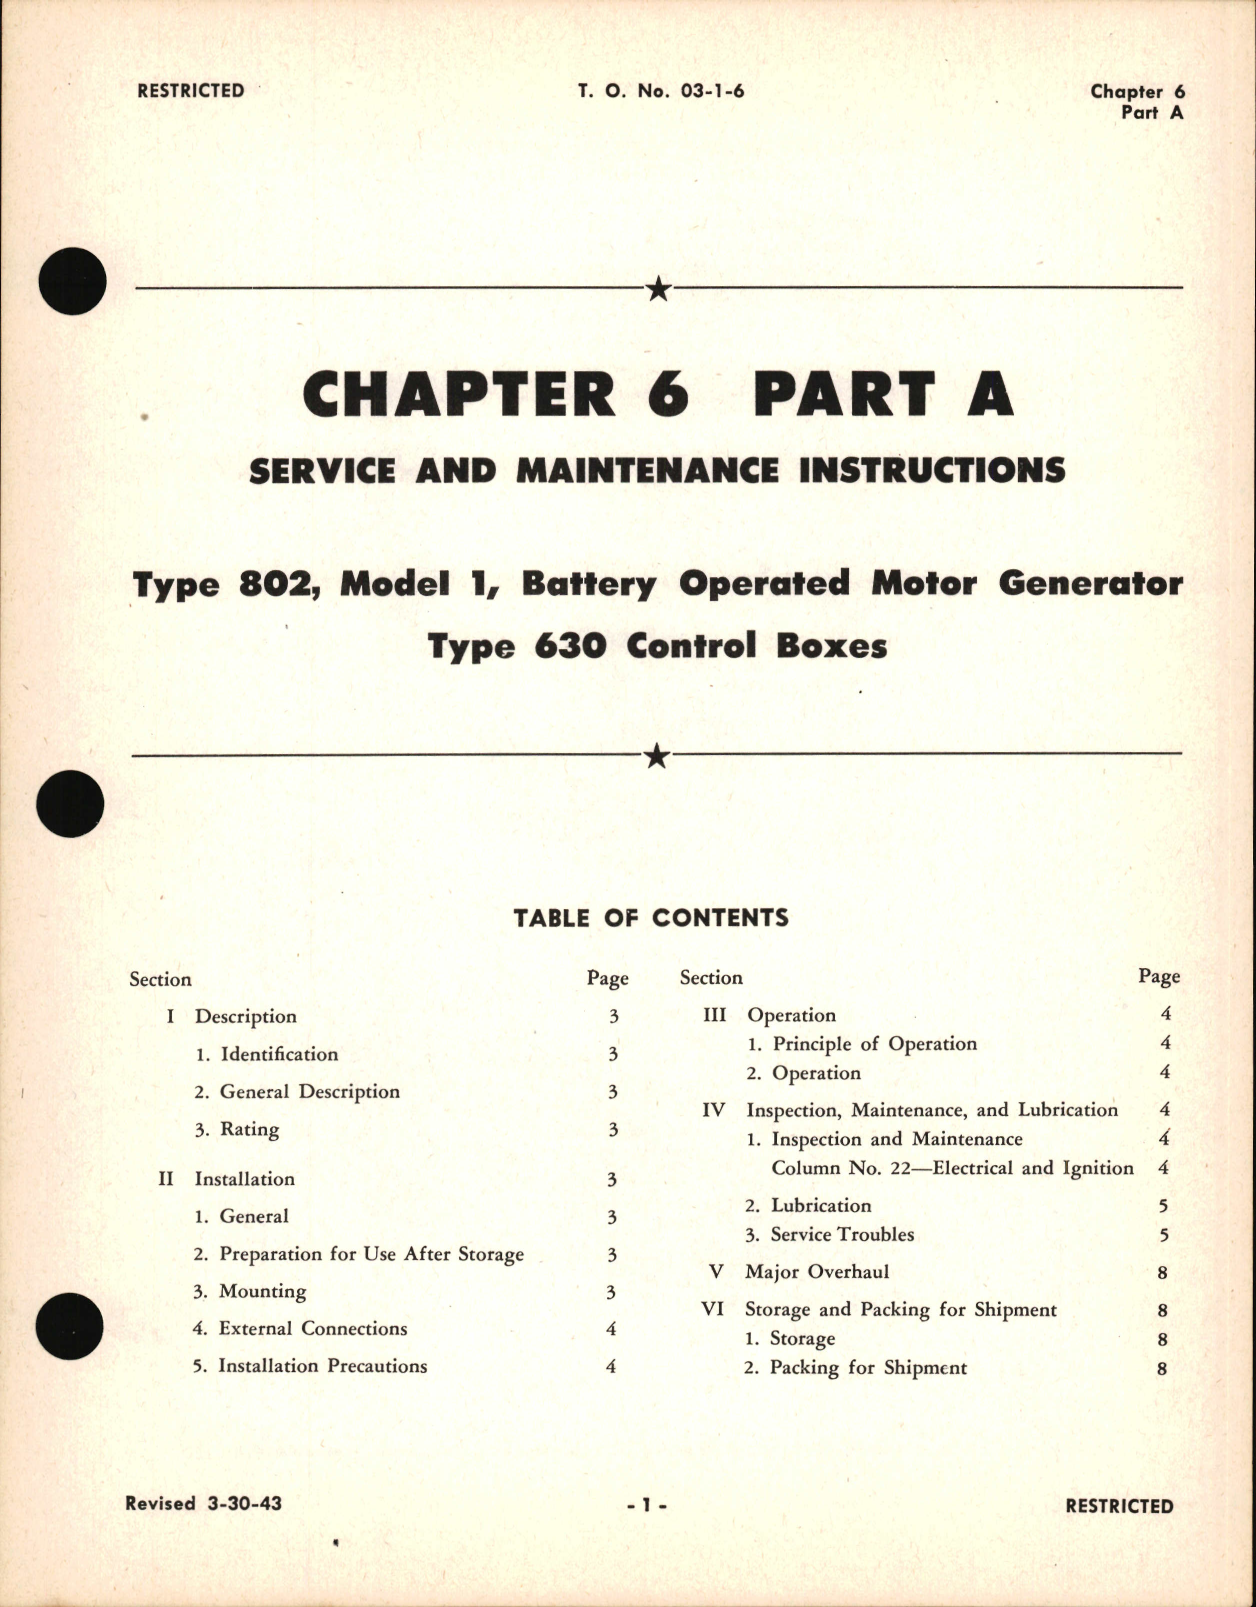 Sample page 1 from AirCorps Library document: Service and Maintenance Instructions for Battery Operated Motor Generator and Control Boxes